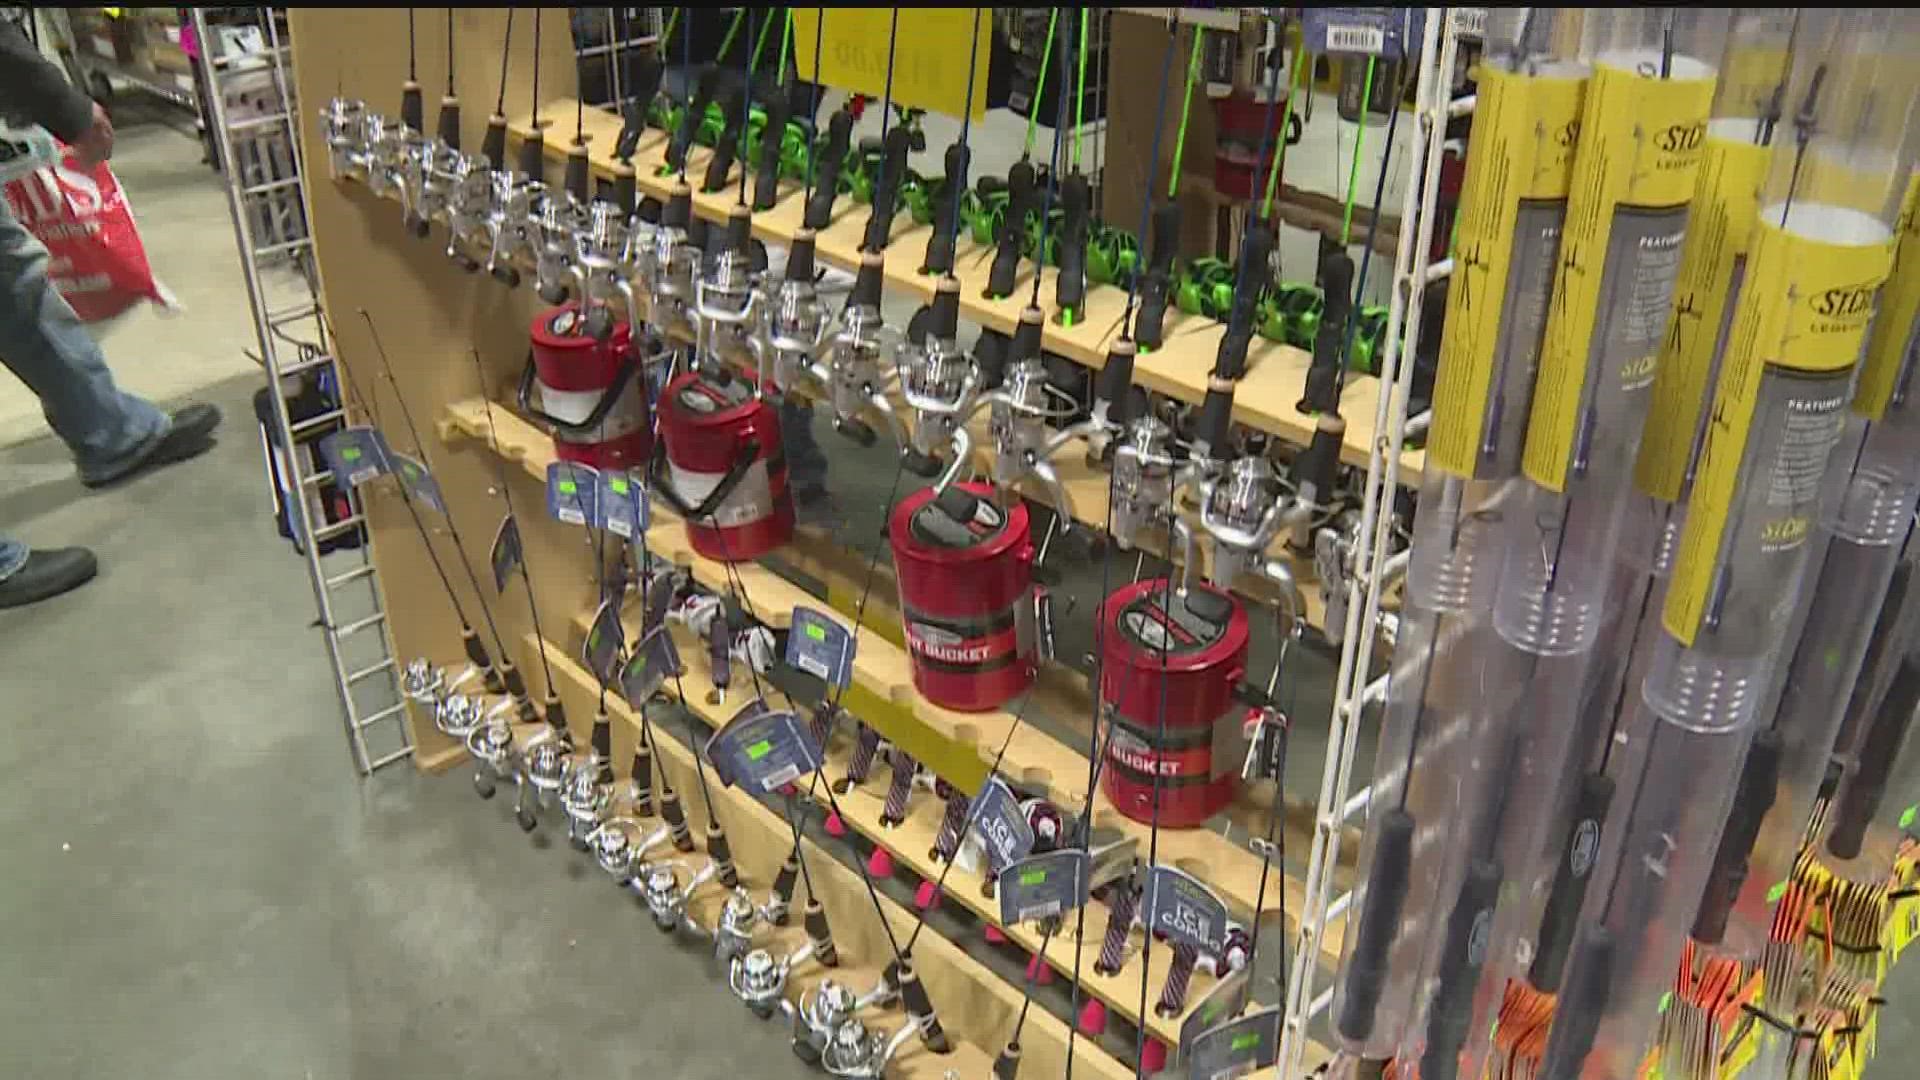 Vendors at the Ice Fishing and Winter Sports Show are trying to keep first time anglers interested after introducing them to ice fishing during the pandemic.